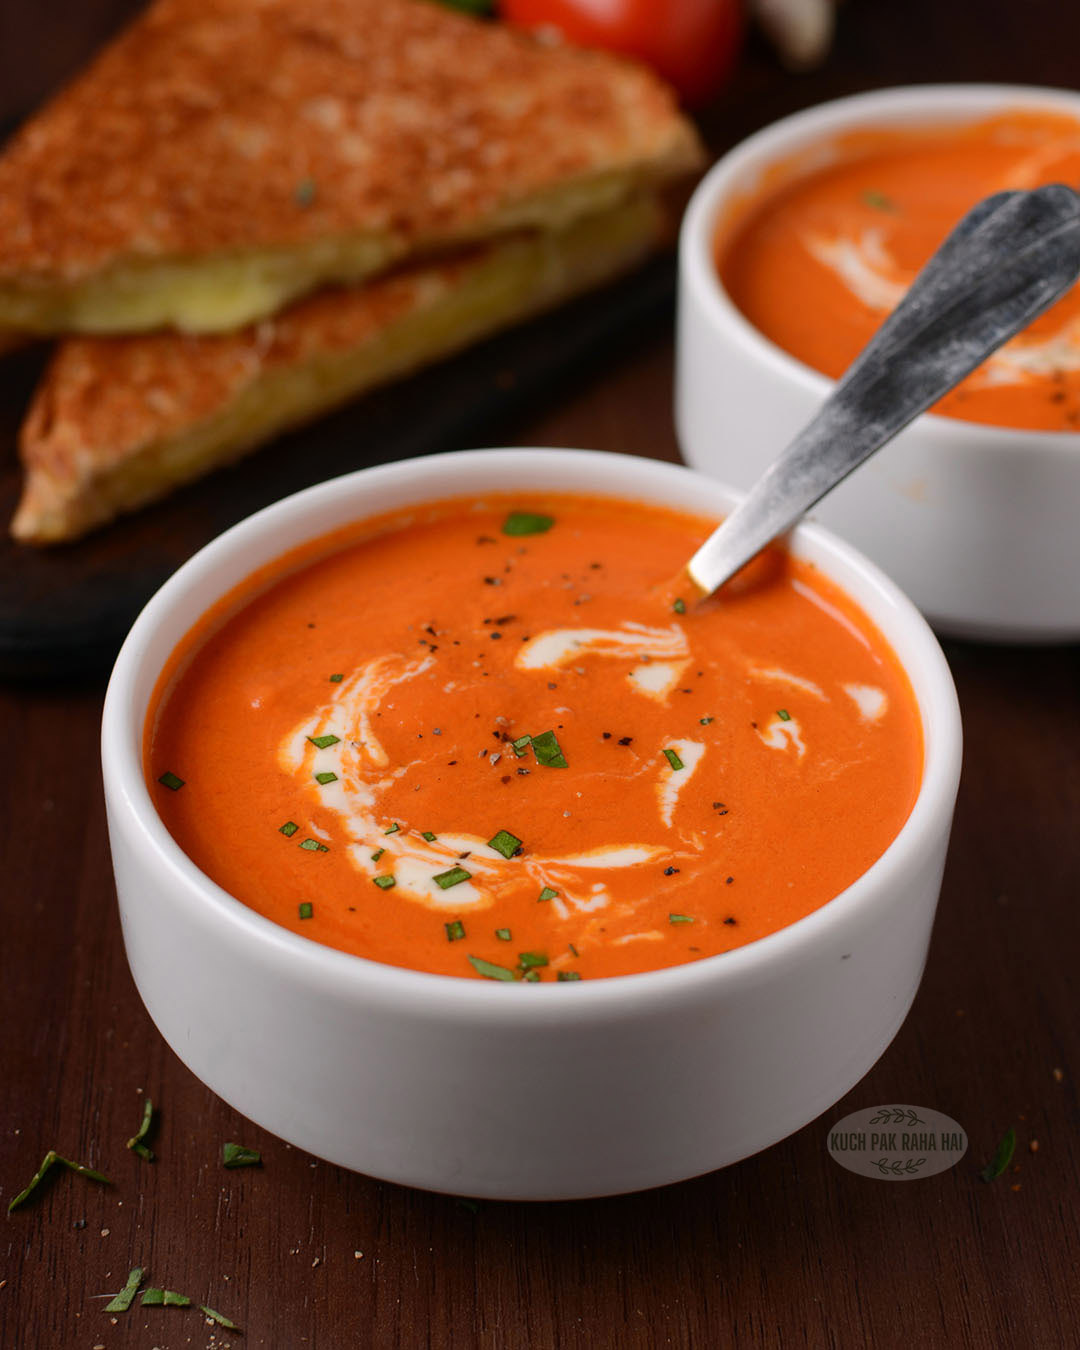 Roasted tomato soup served with grilled cheese sandwich.